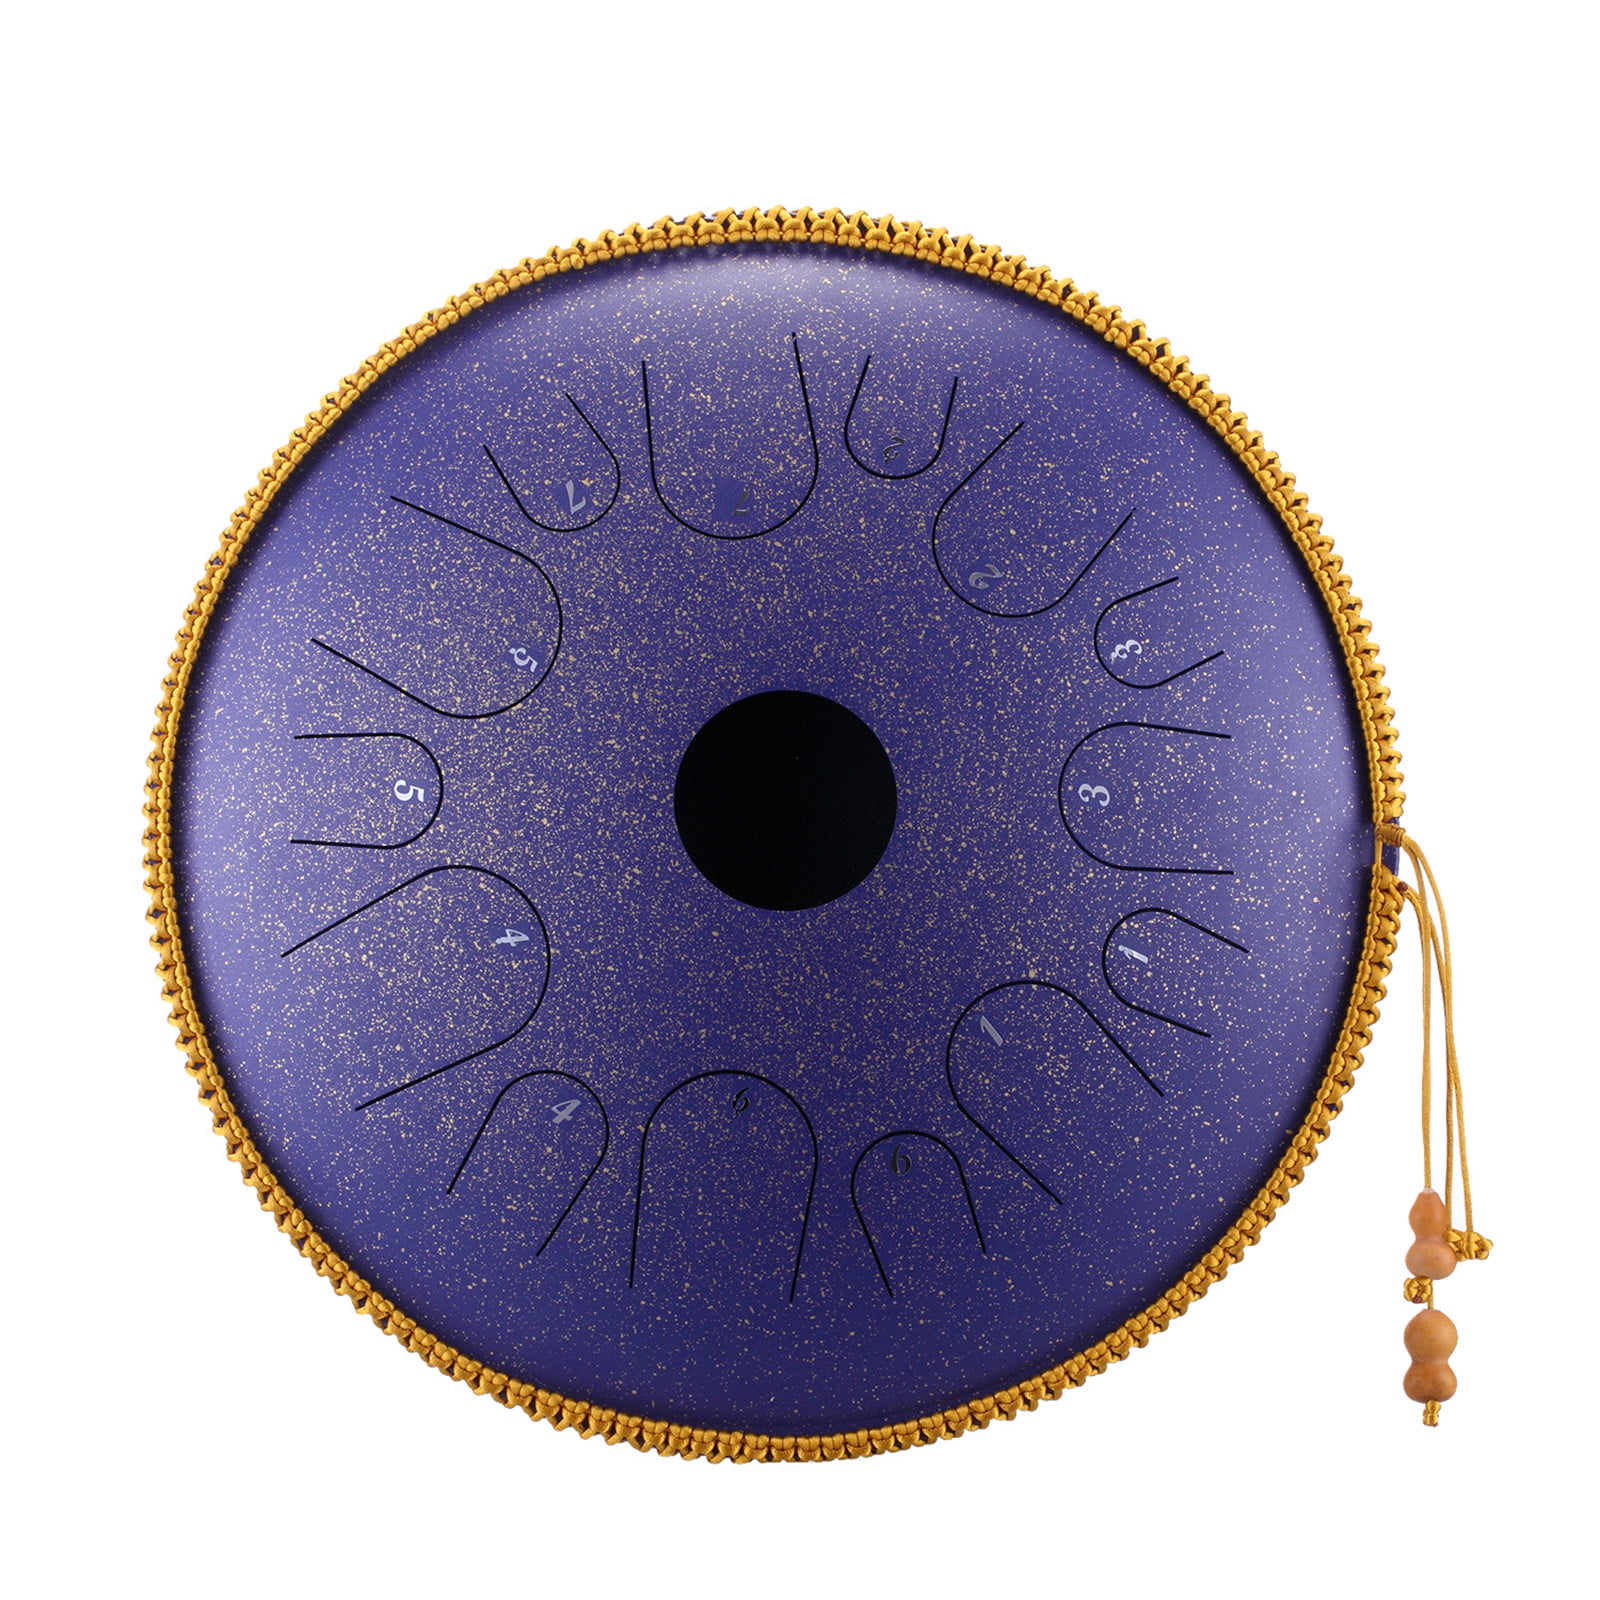 14 Inch 14 Note Steel Tongue Drum, Blue Pan Drum Percussion Instrument with  Drum Mallets Carry Bag